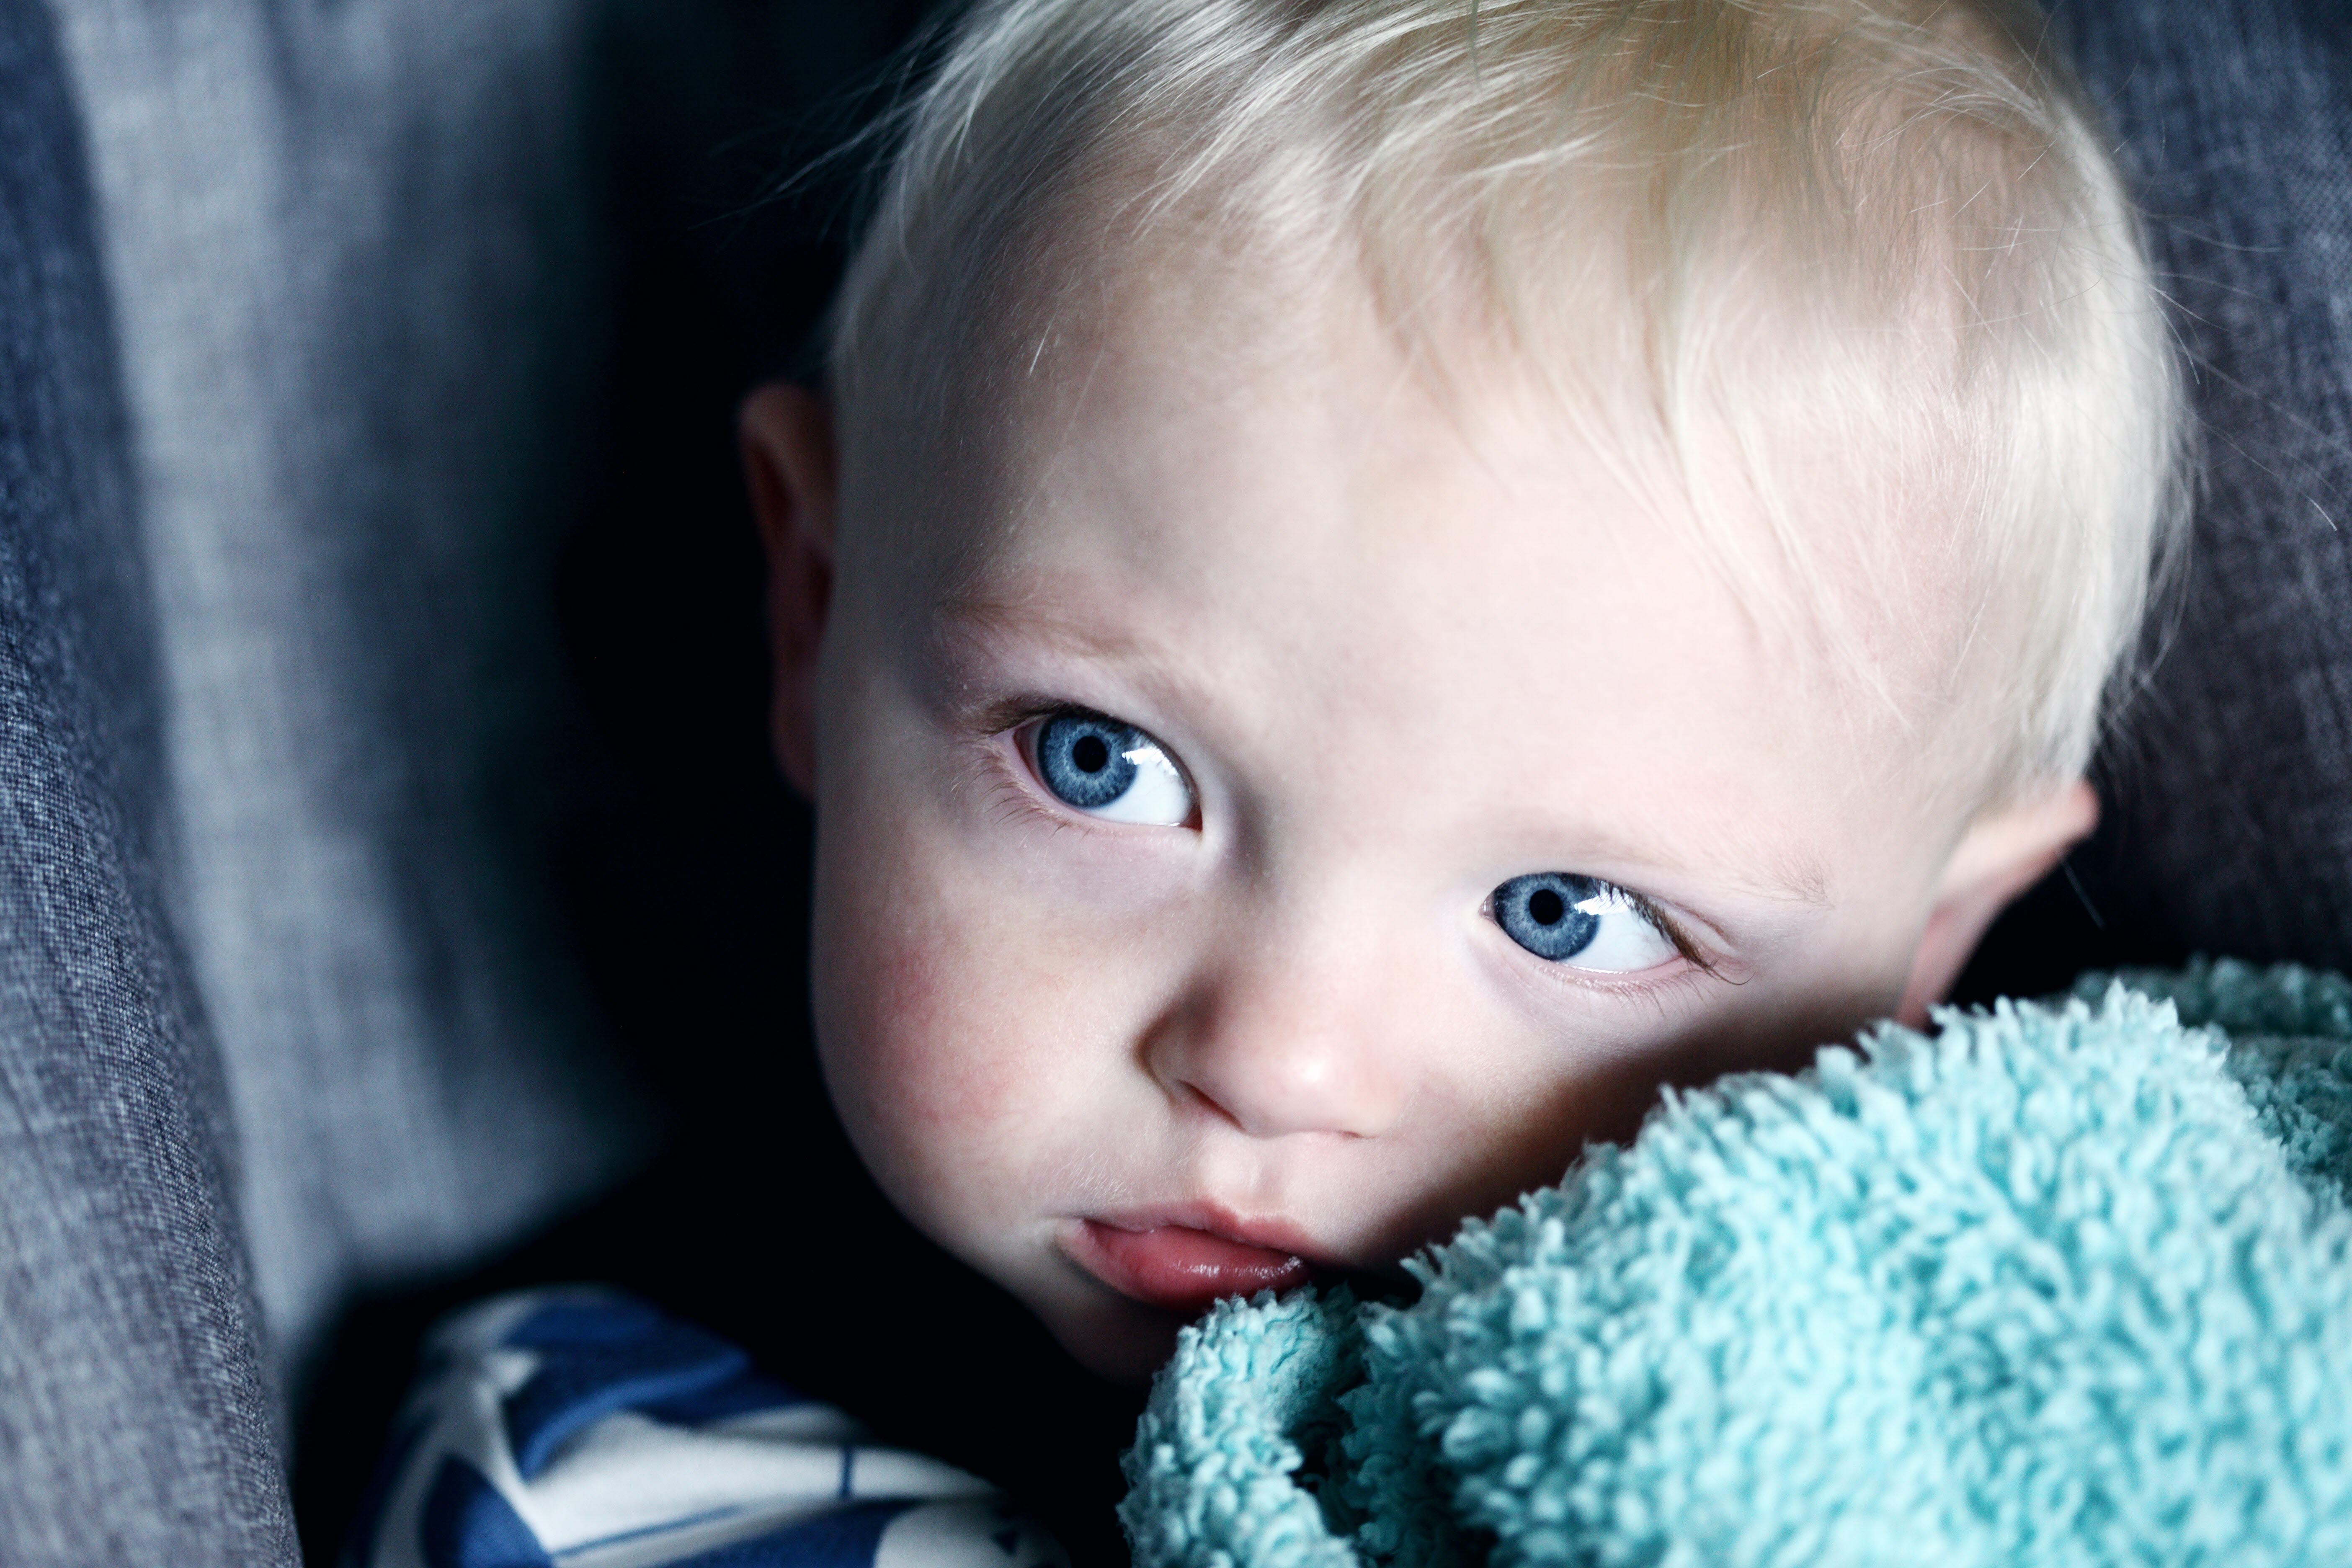 Child snuggling a blanket